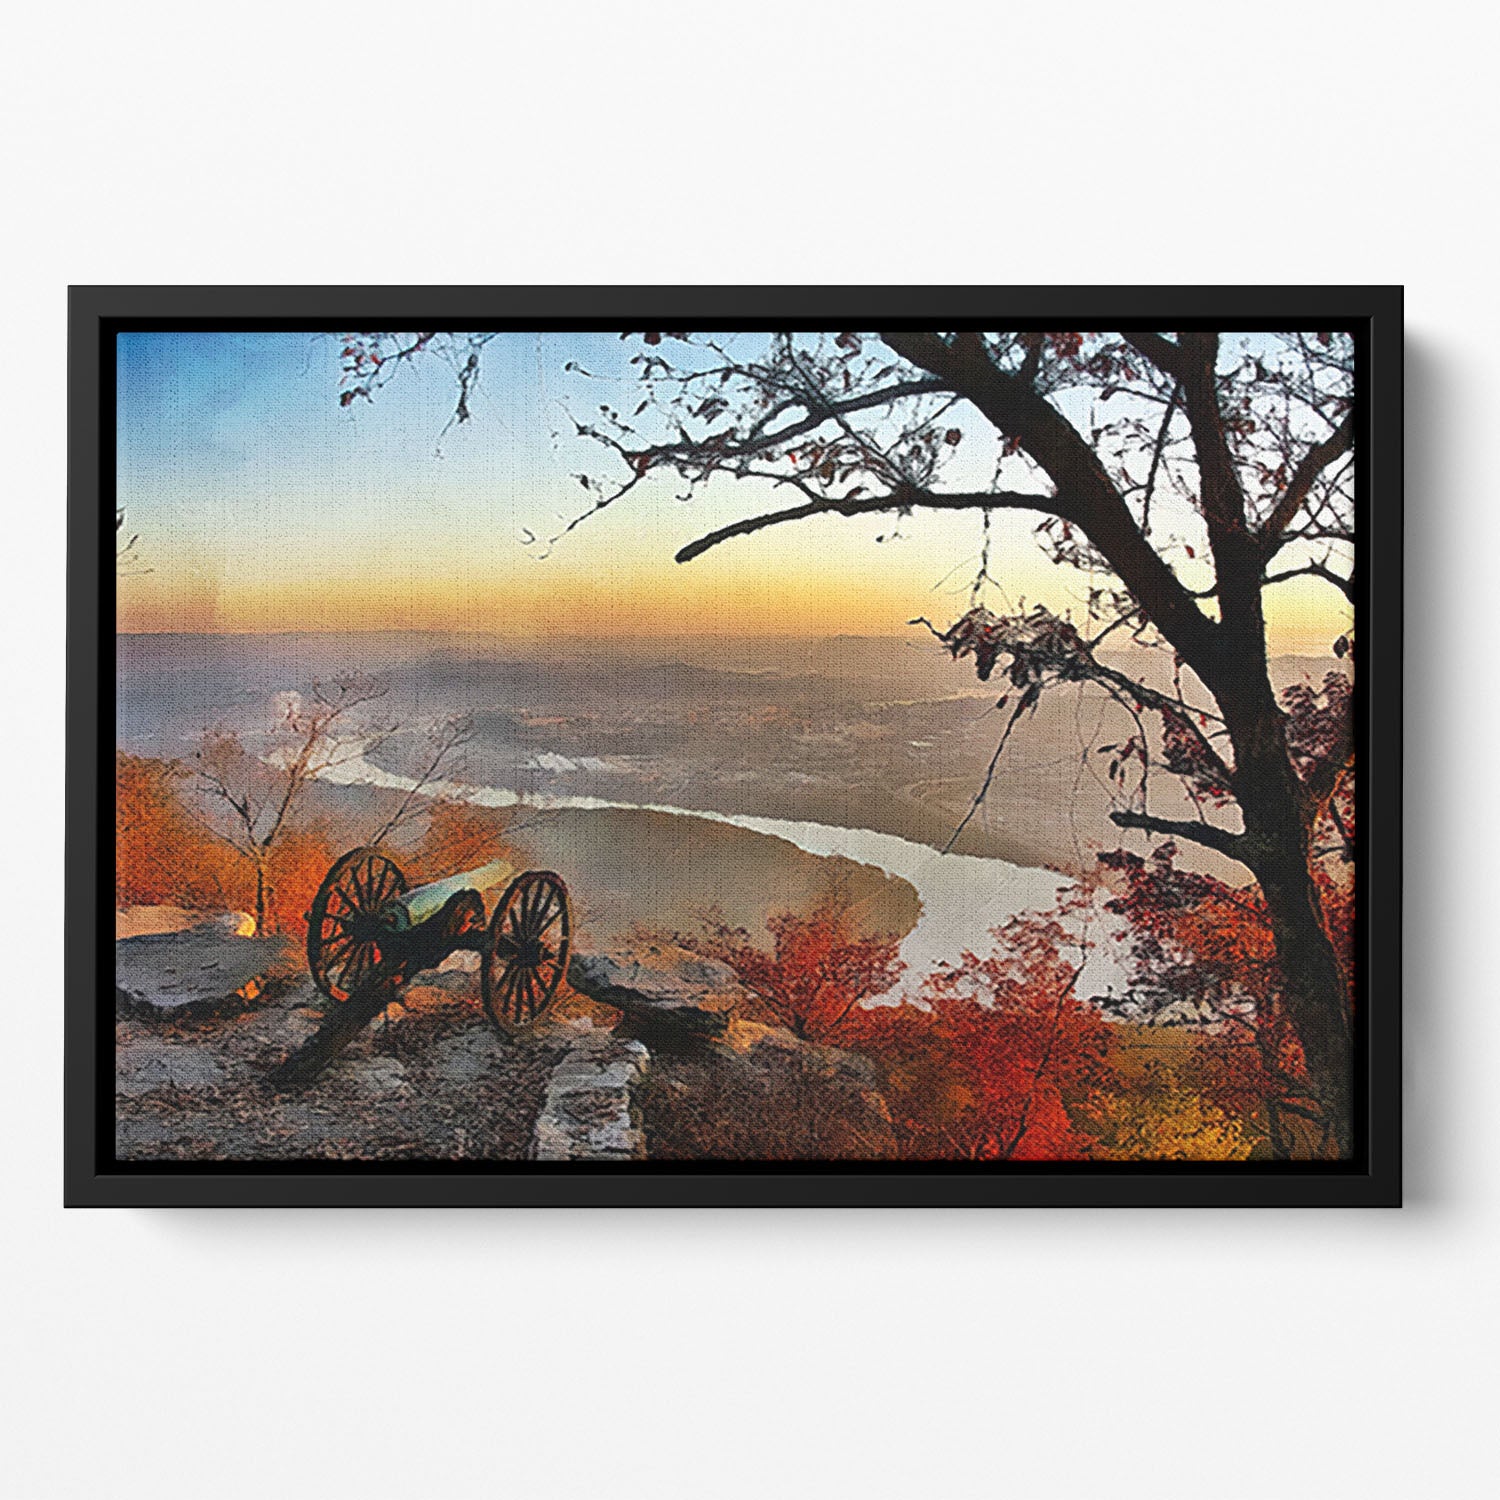 Chattanooga Campaign Painting Floating Framed Canvas